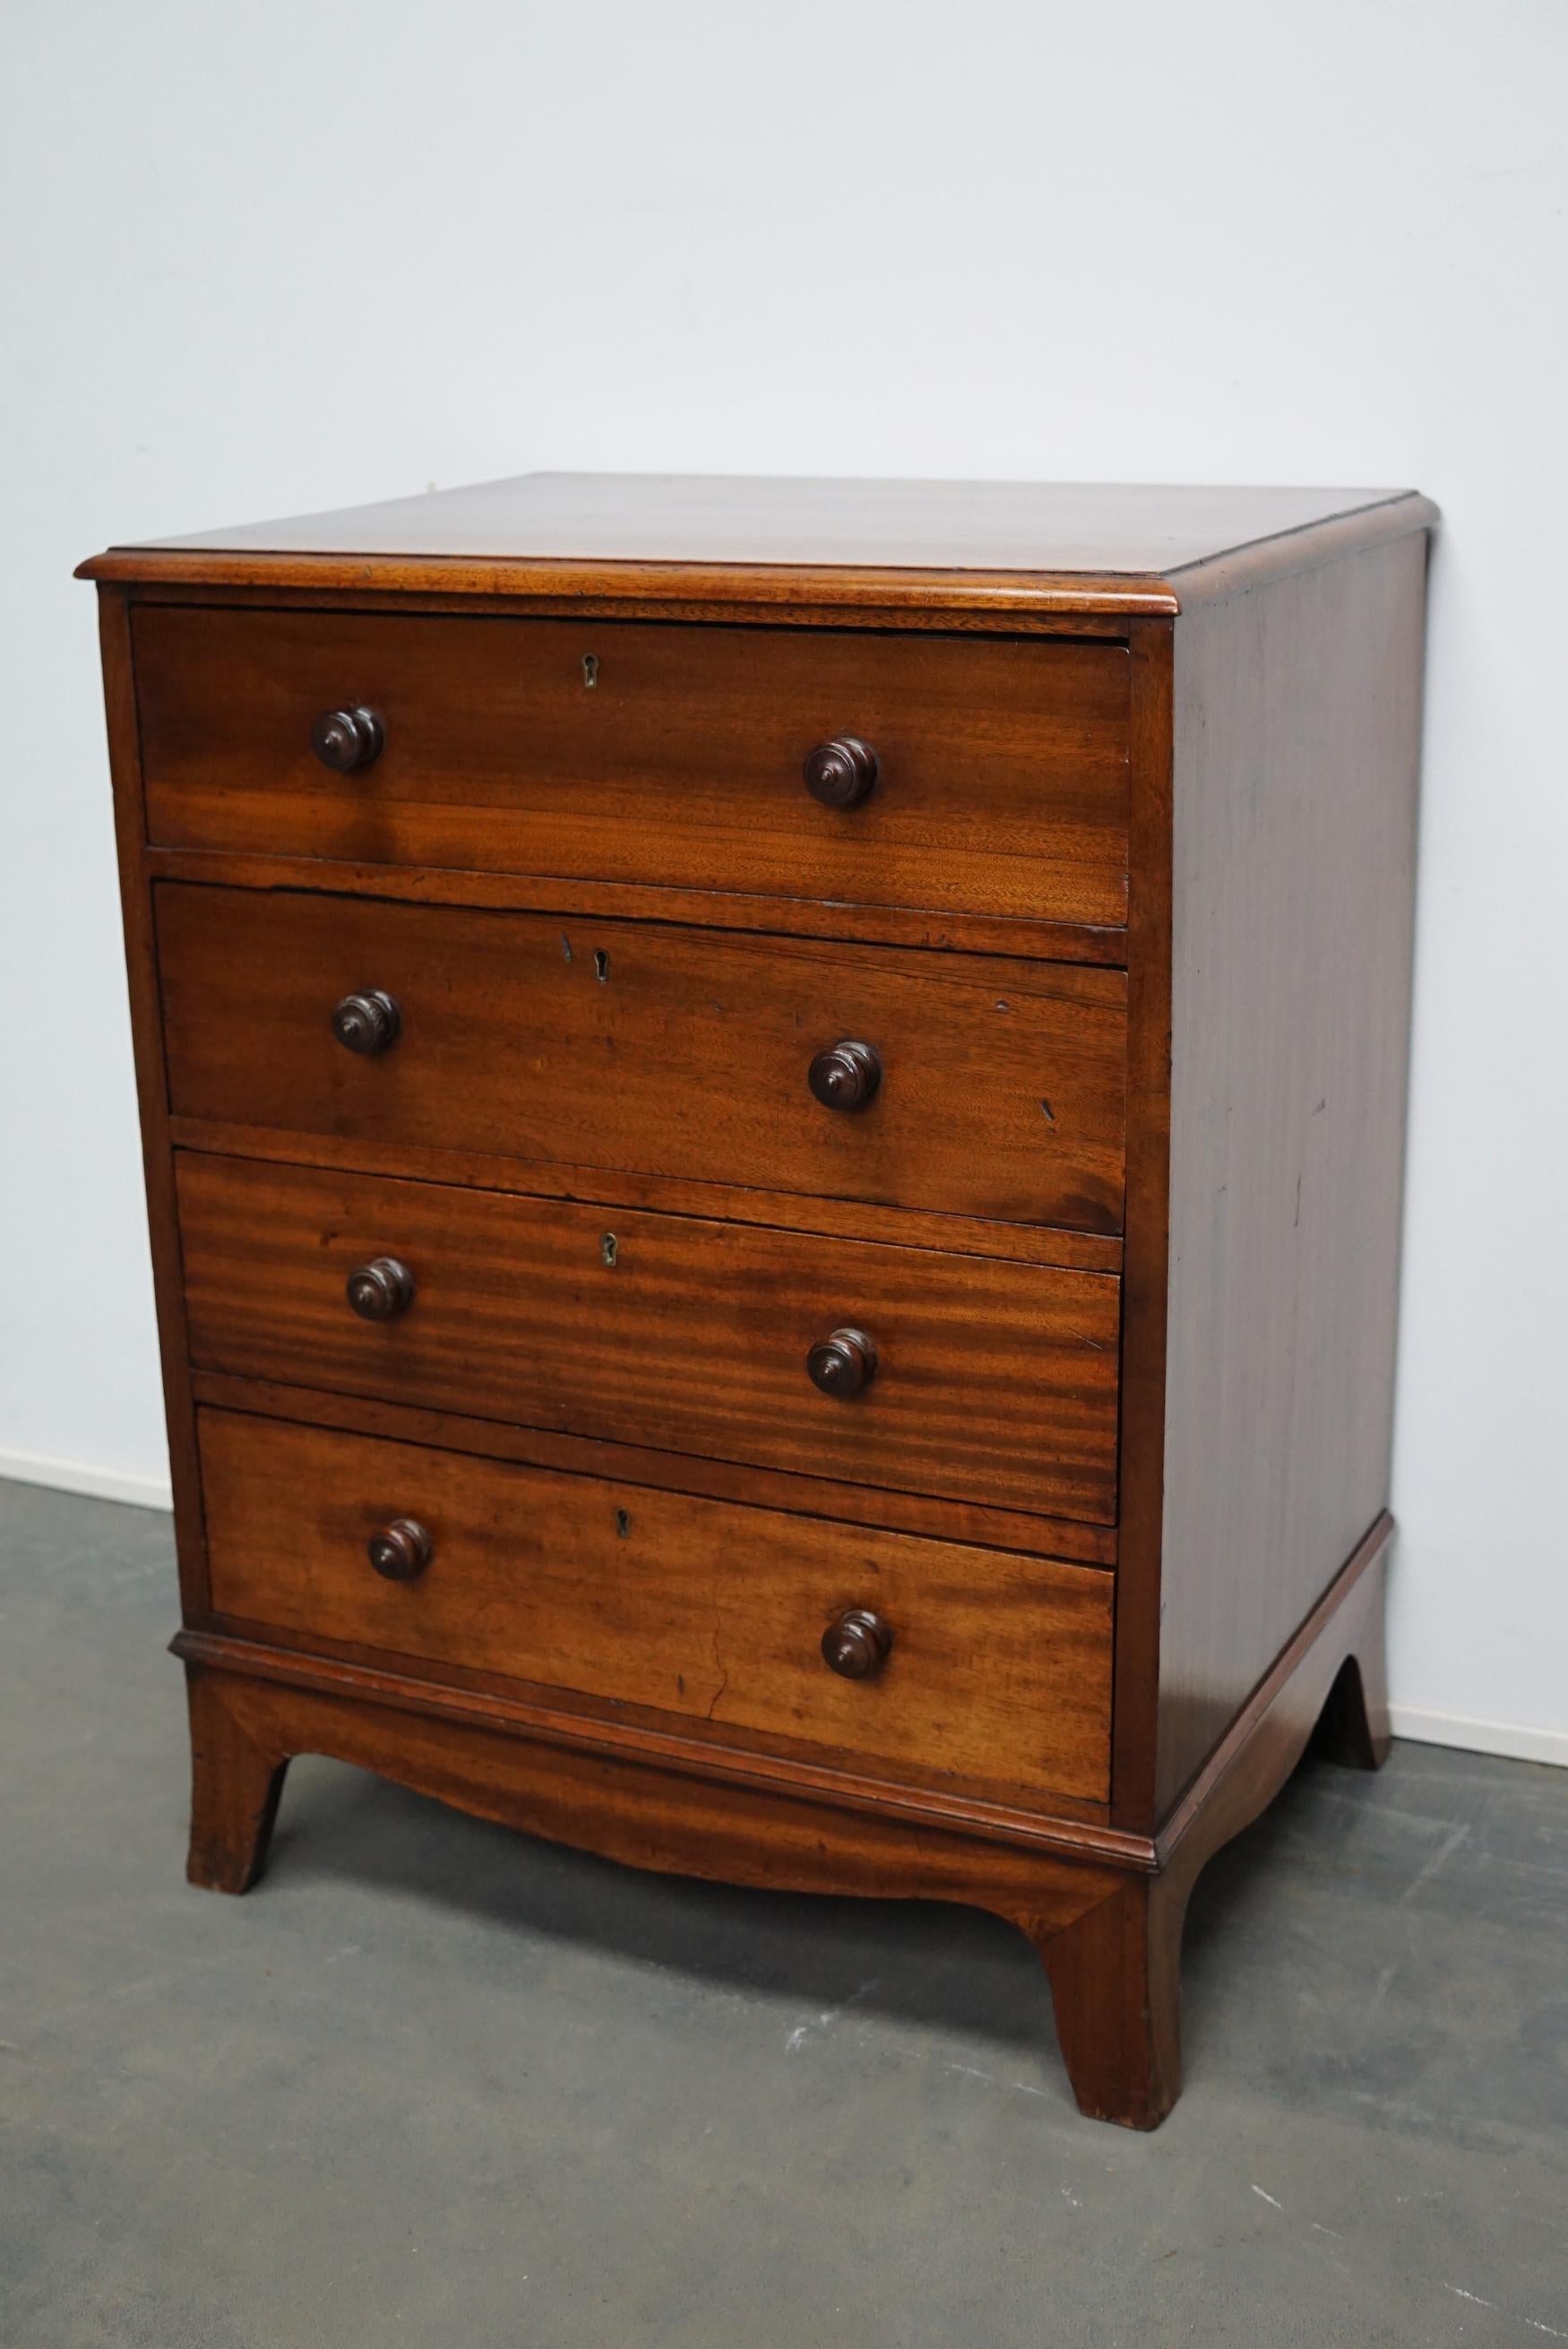 Very nice solid mahogany chest of drawers made circa late 19th century in England. It features 4 drawers with original locks (no keys). It remains in a good antique condition with a nice patina and color. The interior dimensions of the drawers are: